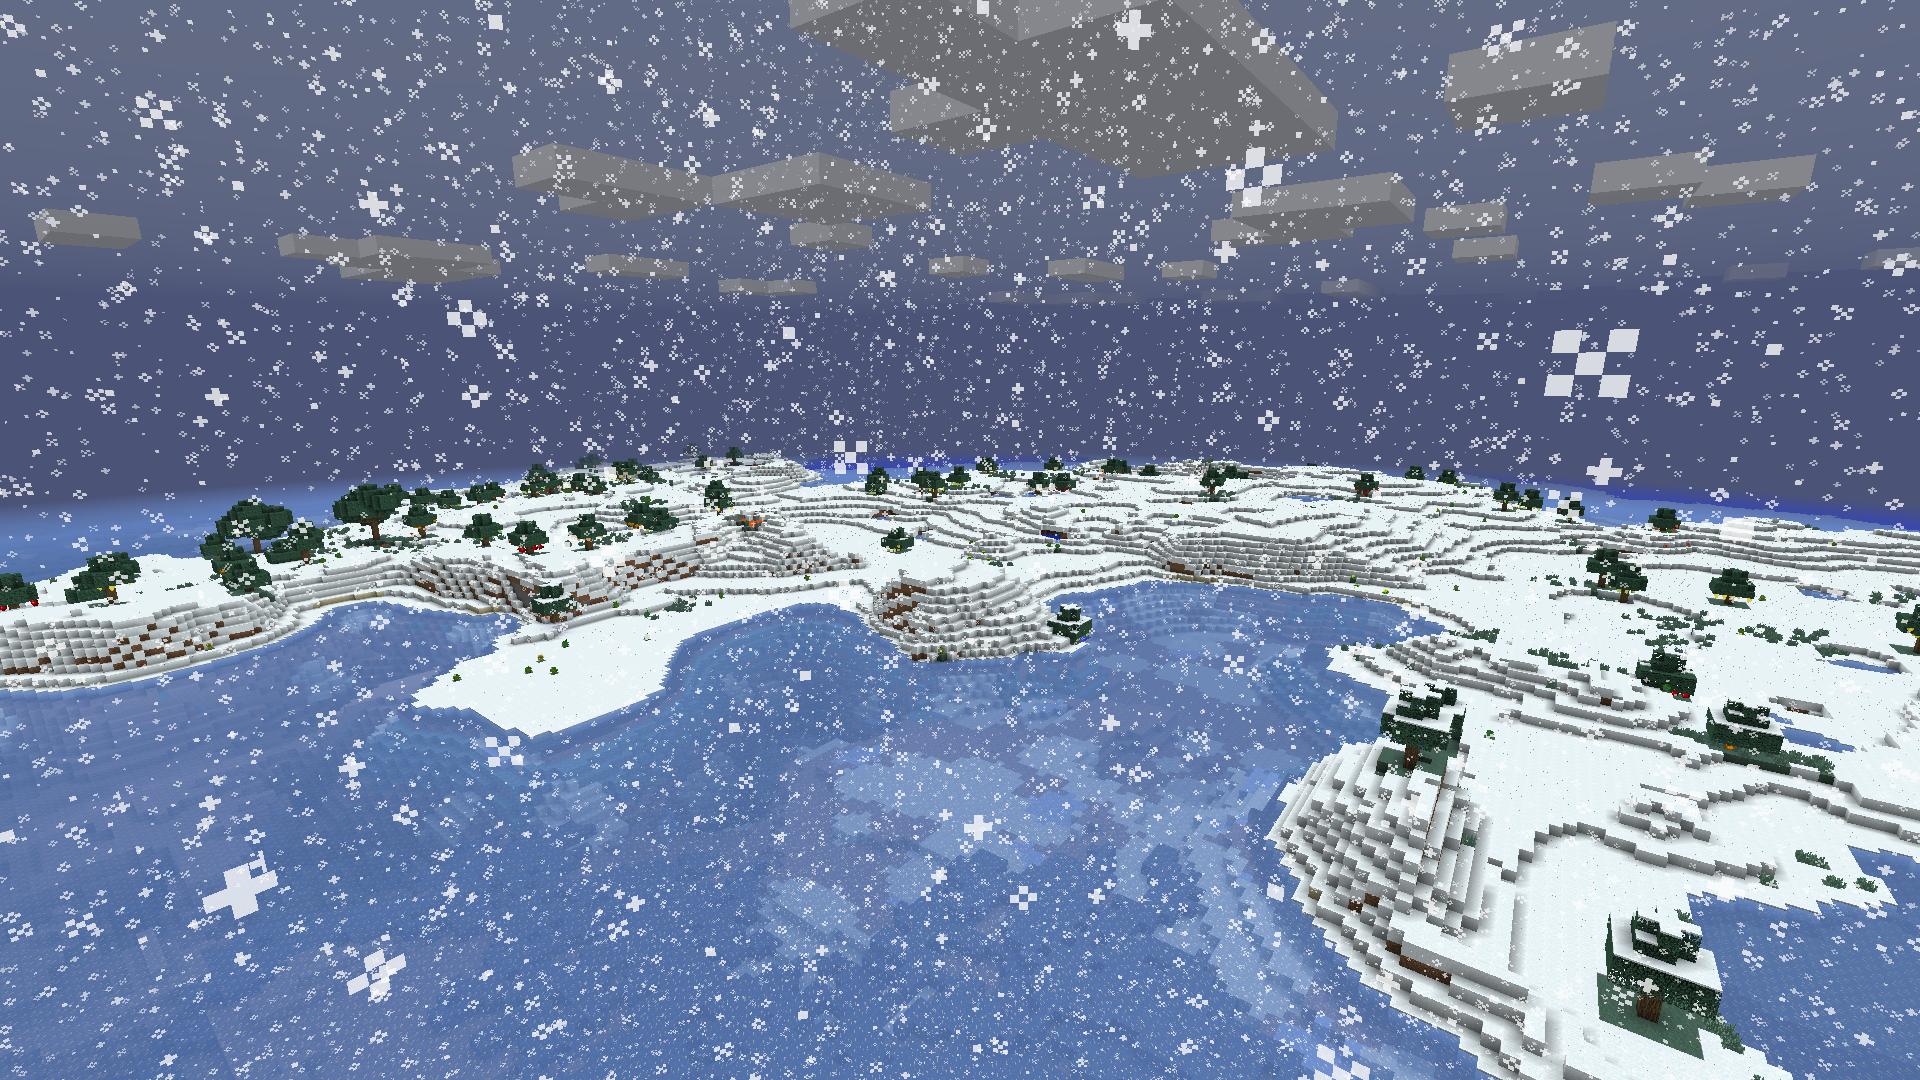 What is the title of this picture ? Image - WinterMC.jpg | Minecraft Pocket Edition Wiki | FANDOM powered